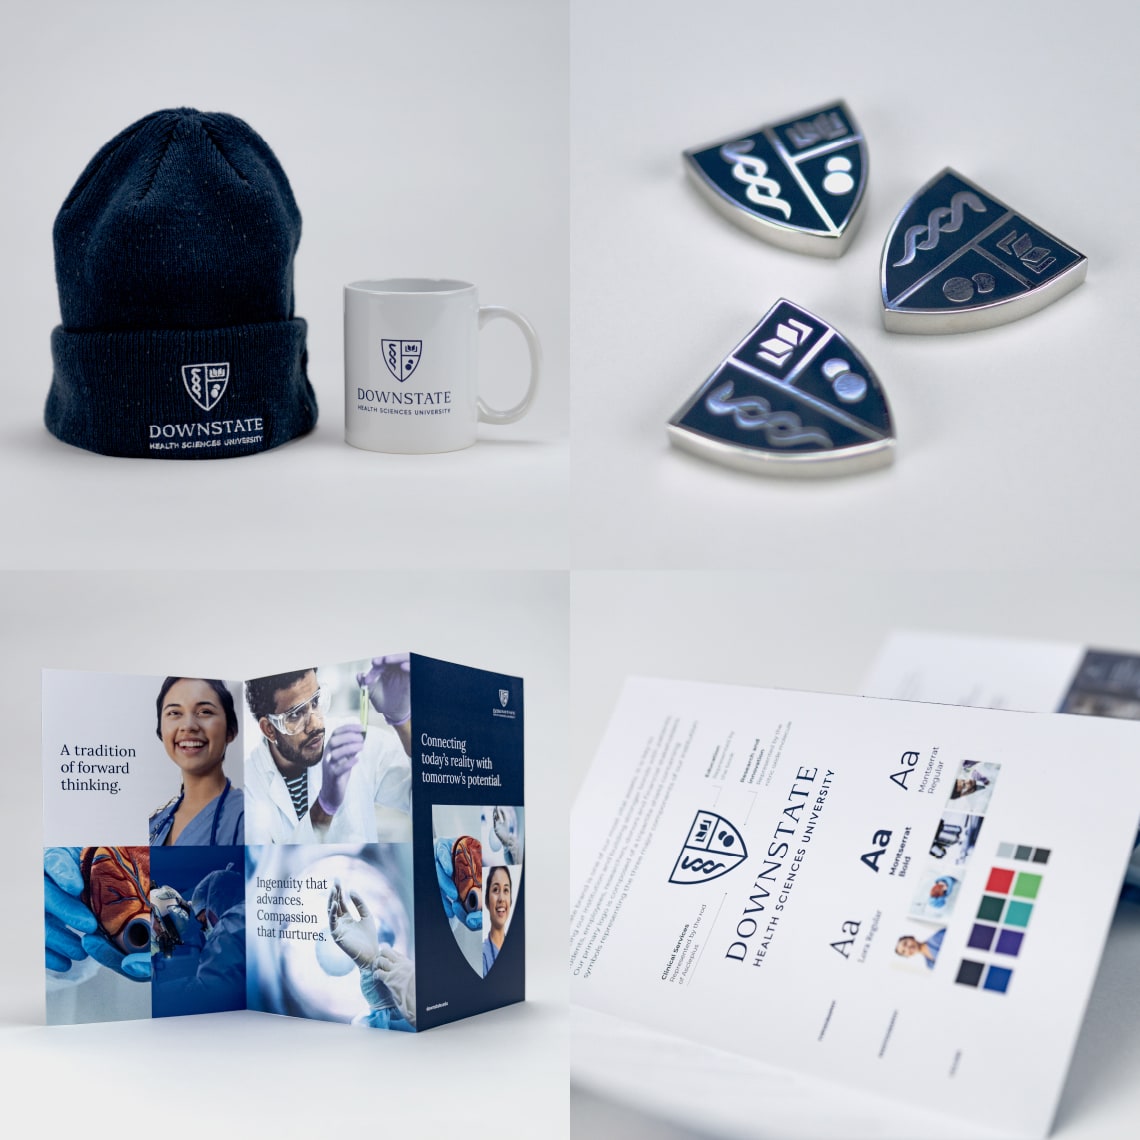 Examples of how the new design system developed for SUNY is applied in different pieces such as winter hats, mugs, pins, and folded brochures